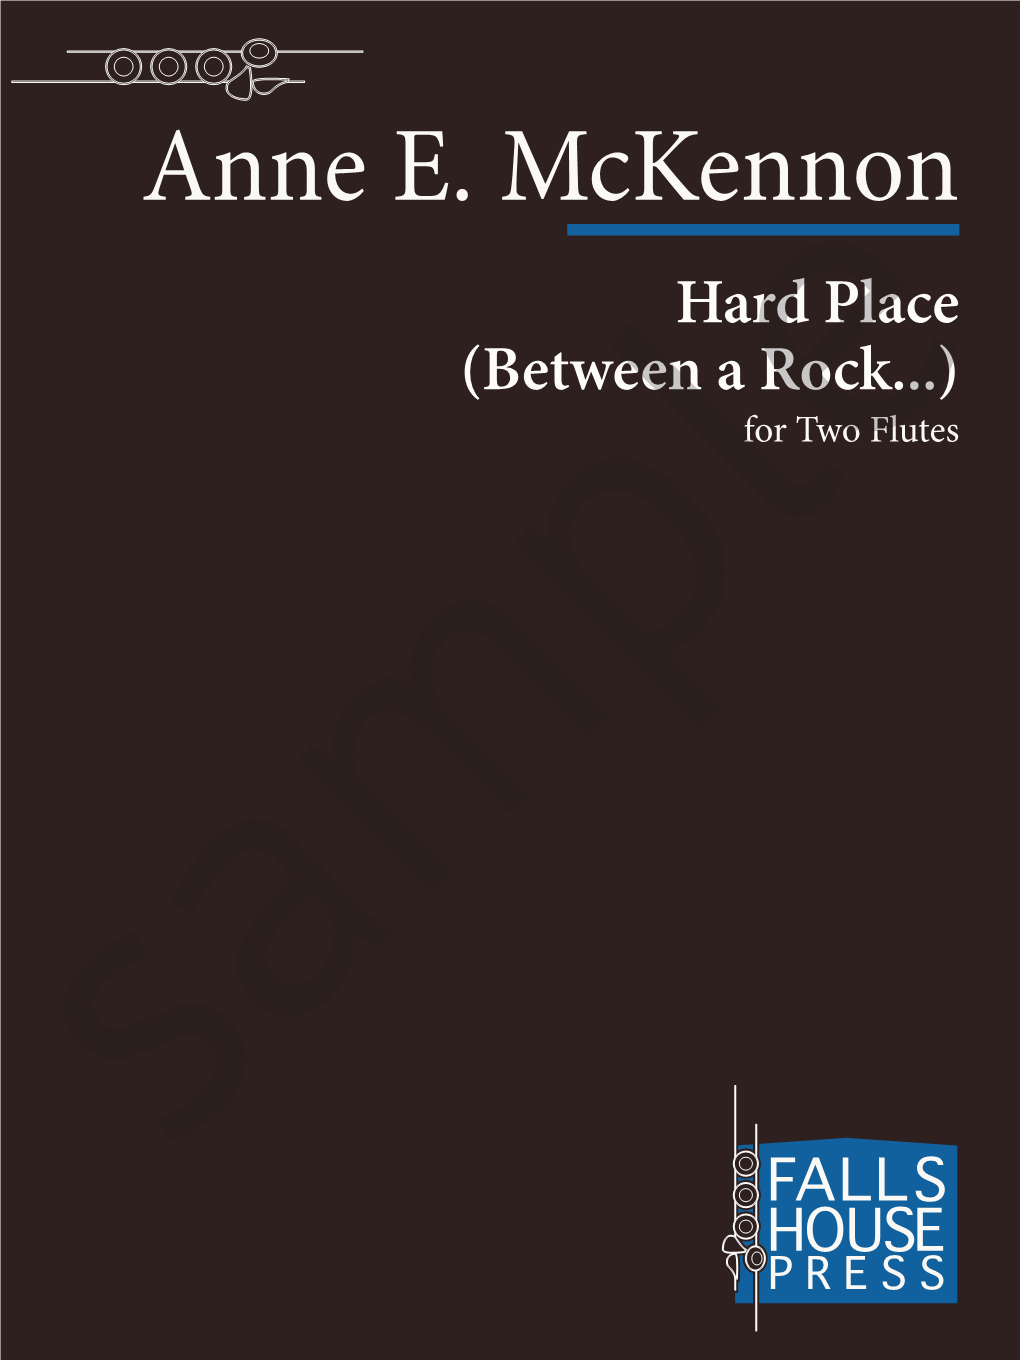 Anne E. Mckennon Hard Place (Between a Rock...) Is a Chal- Lenging Conversation Between Two Flutes